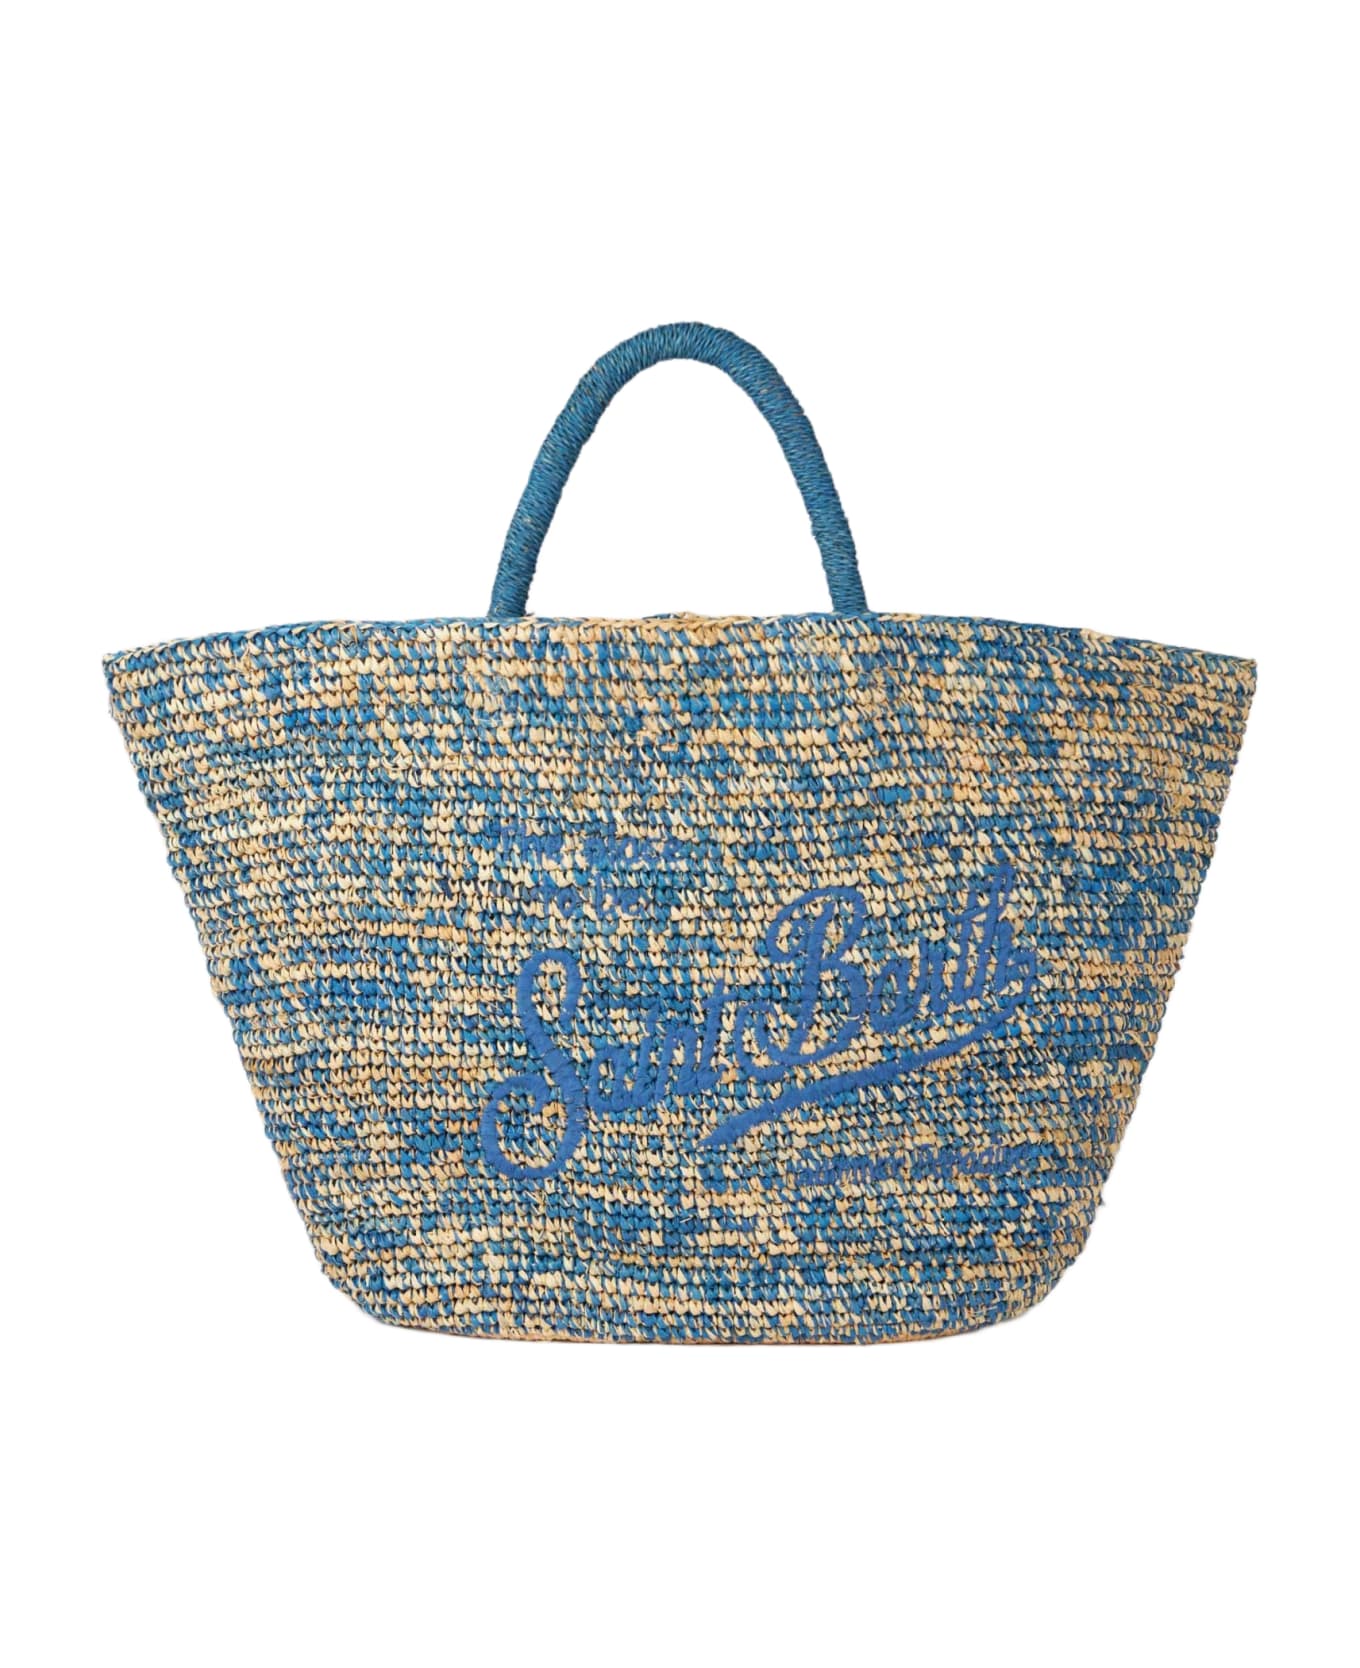 MC2 Saint Barth Raffia Blue And White Bag With Front Embroidery - BLUE